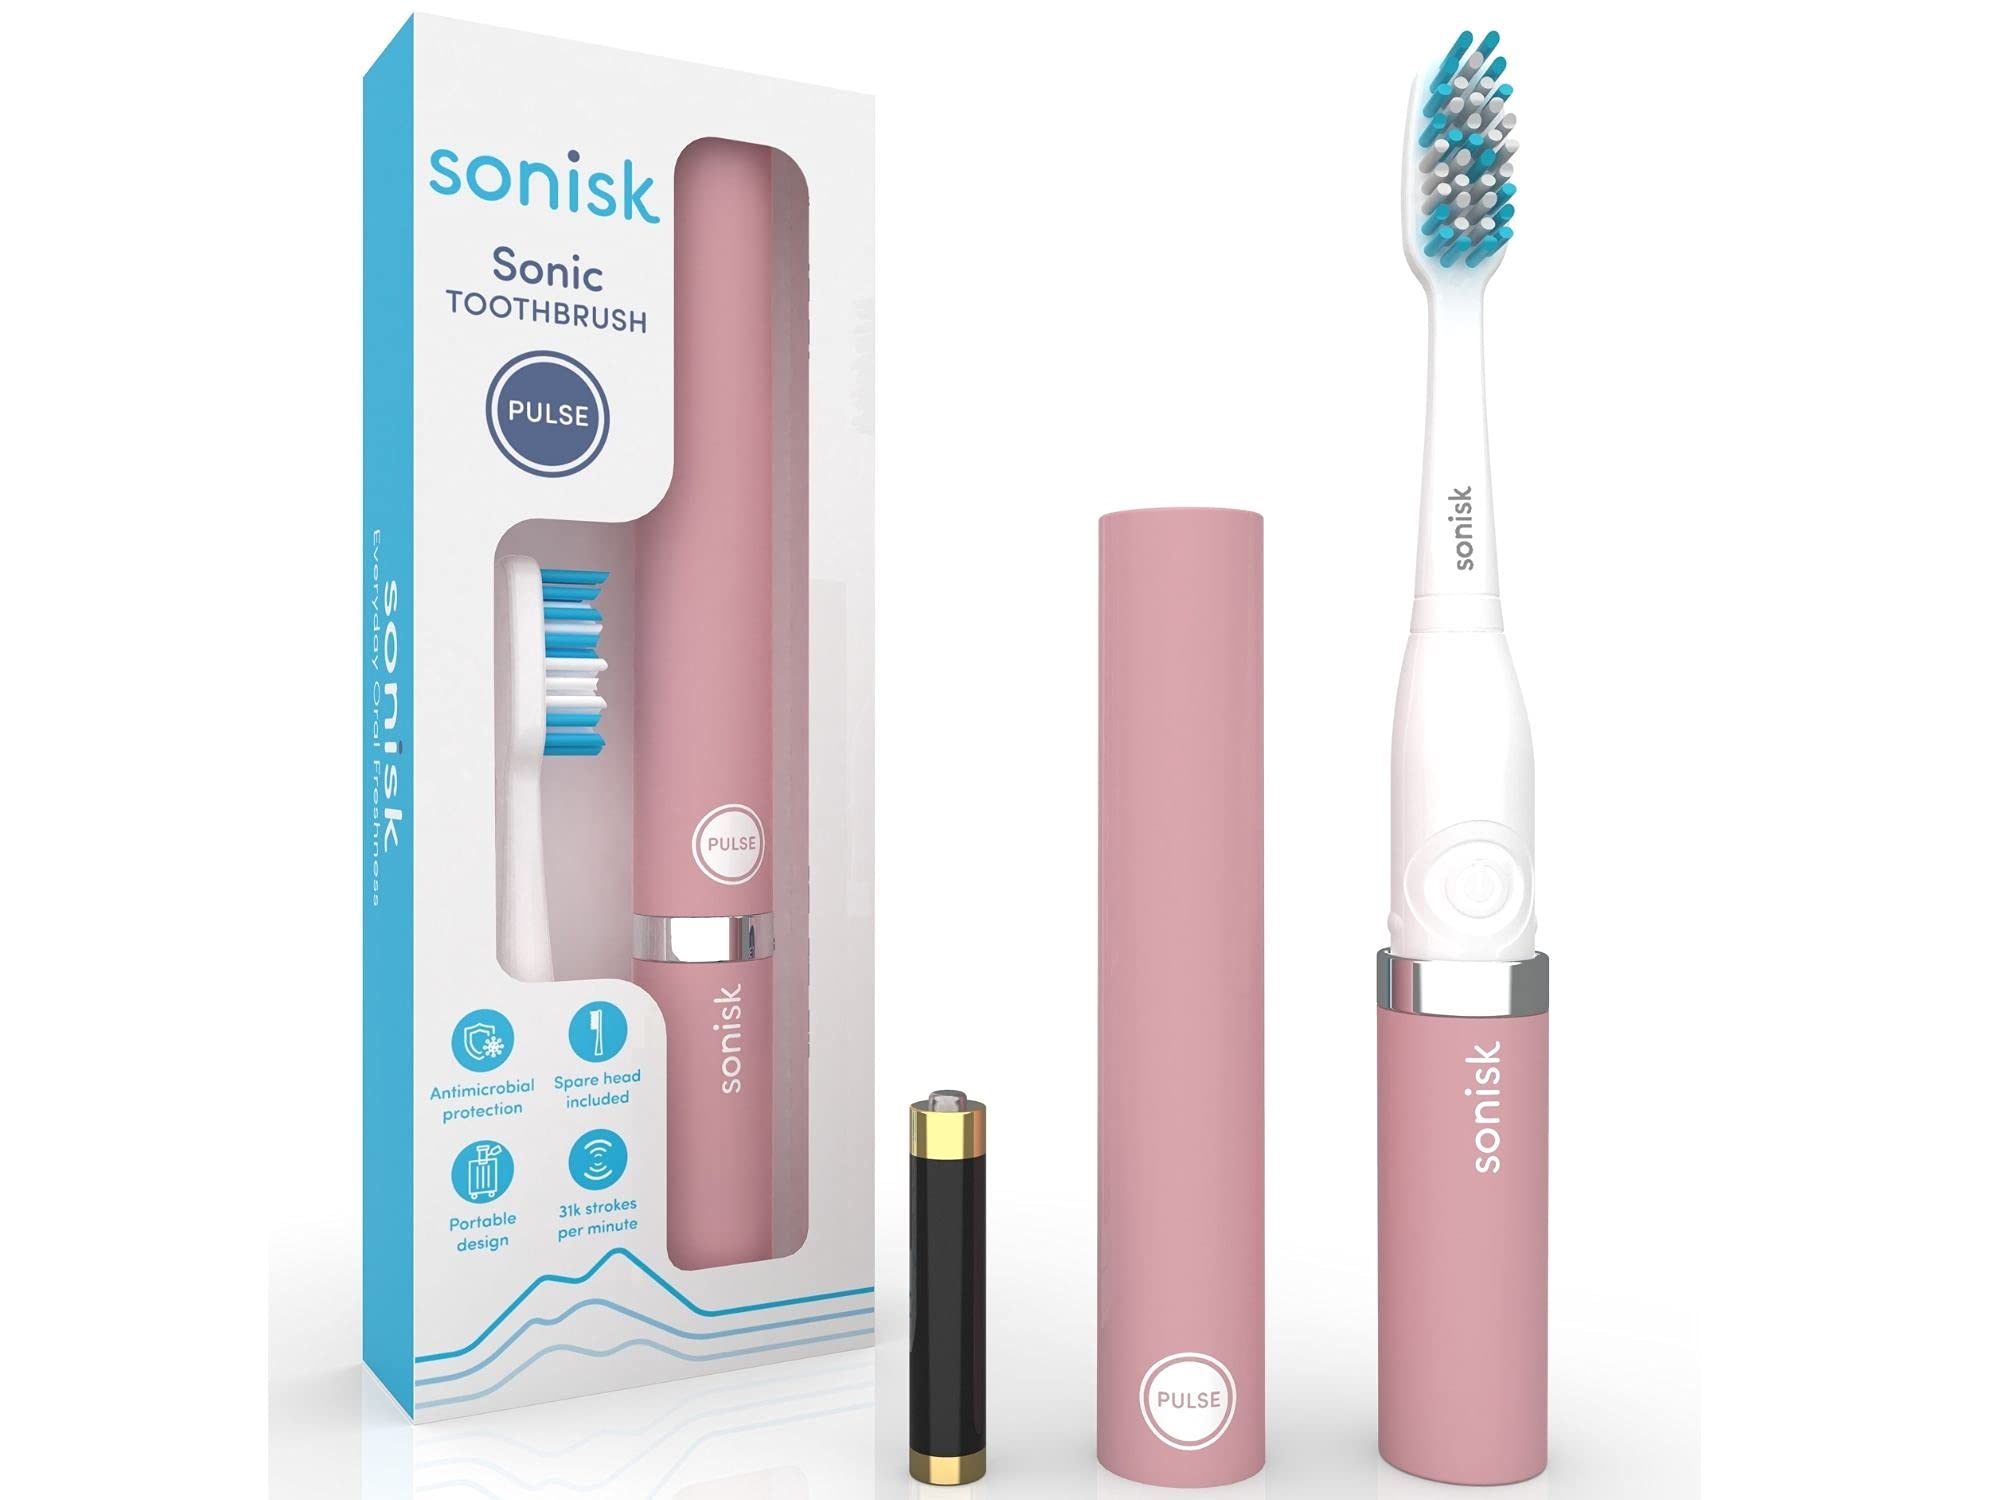 Sonisk Pulse | Battery Powered Electric Toothbrush | Sonic Technology | 1x Battery, 2X Brush Heads, 1x Travel Case Included | 31,000 Strokes Per Minute | Antimicrobial | Portable Size | Dusty Pink